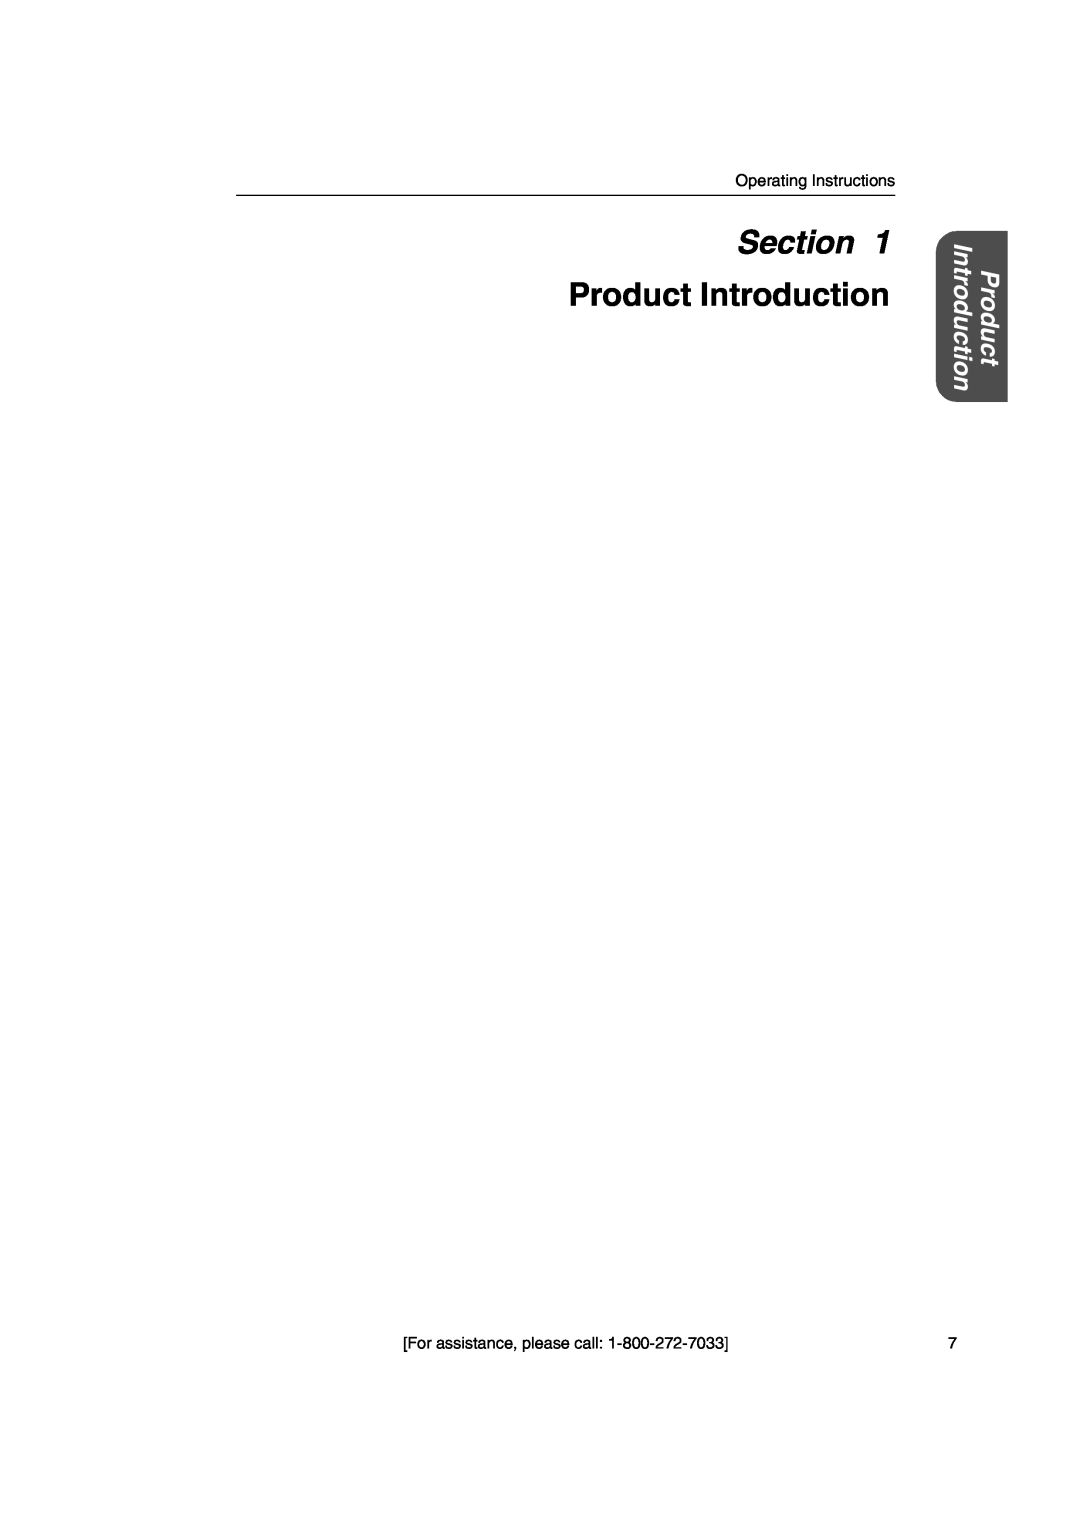 Panasonic KX-HGW600 manual Section, Product Introduction 